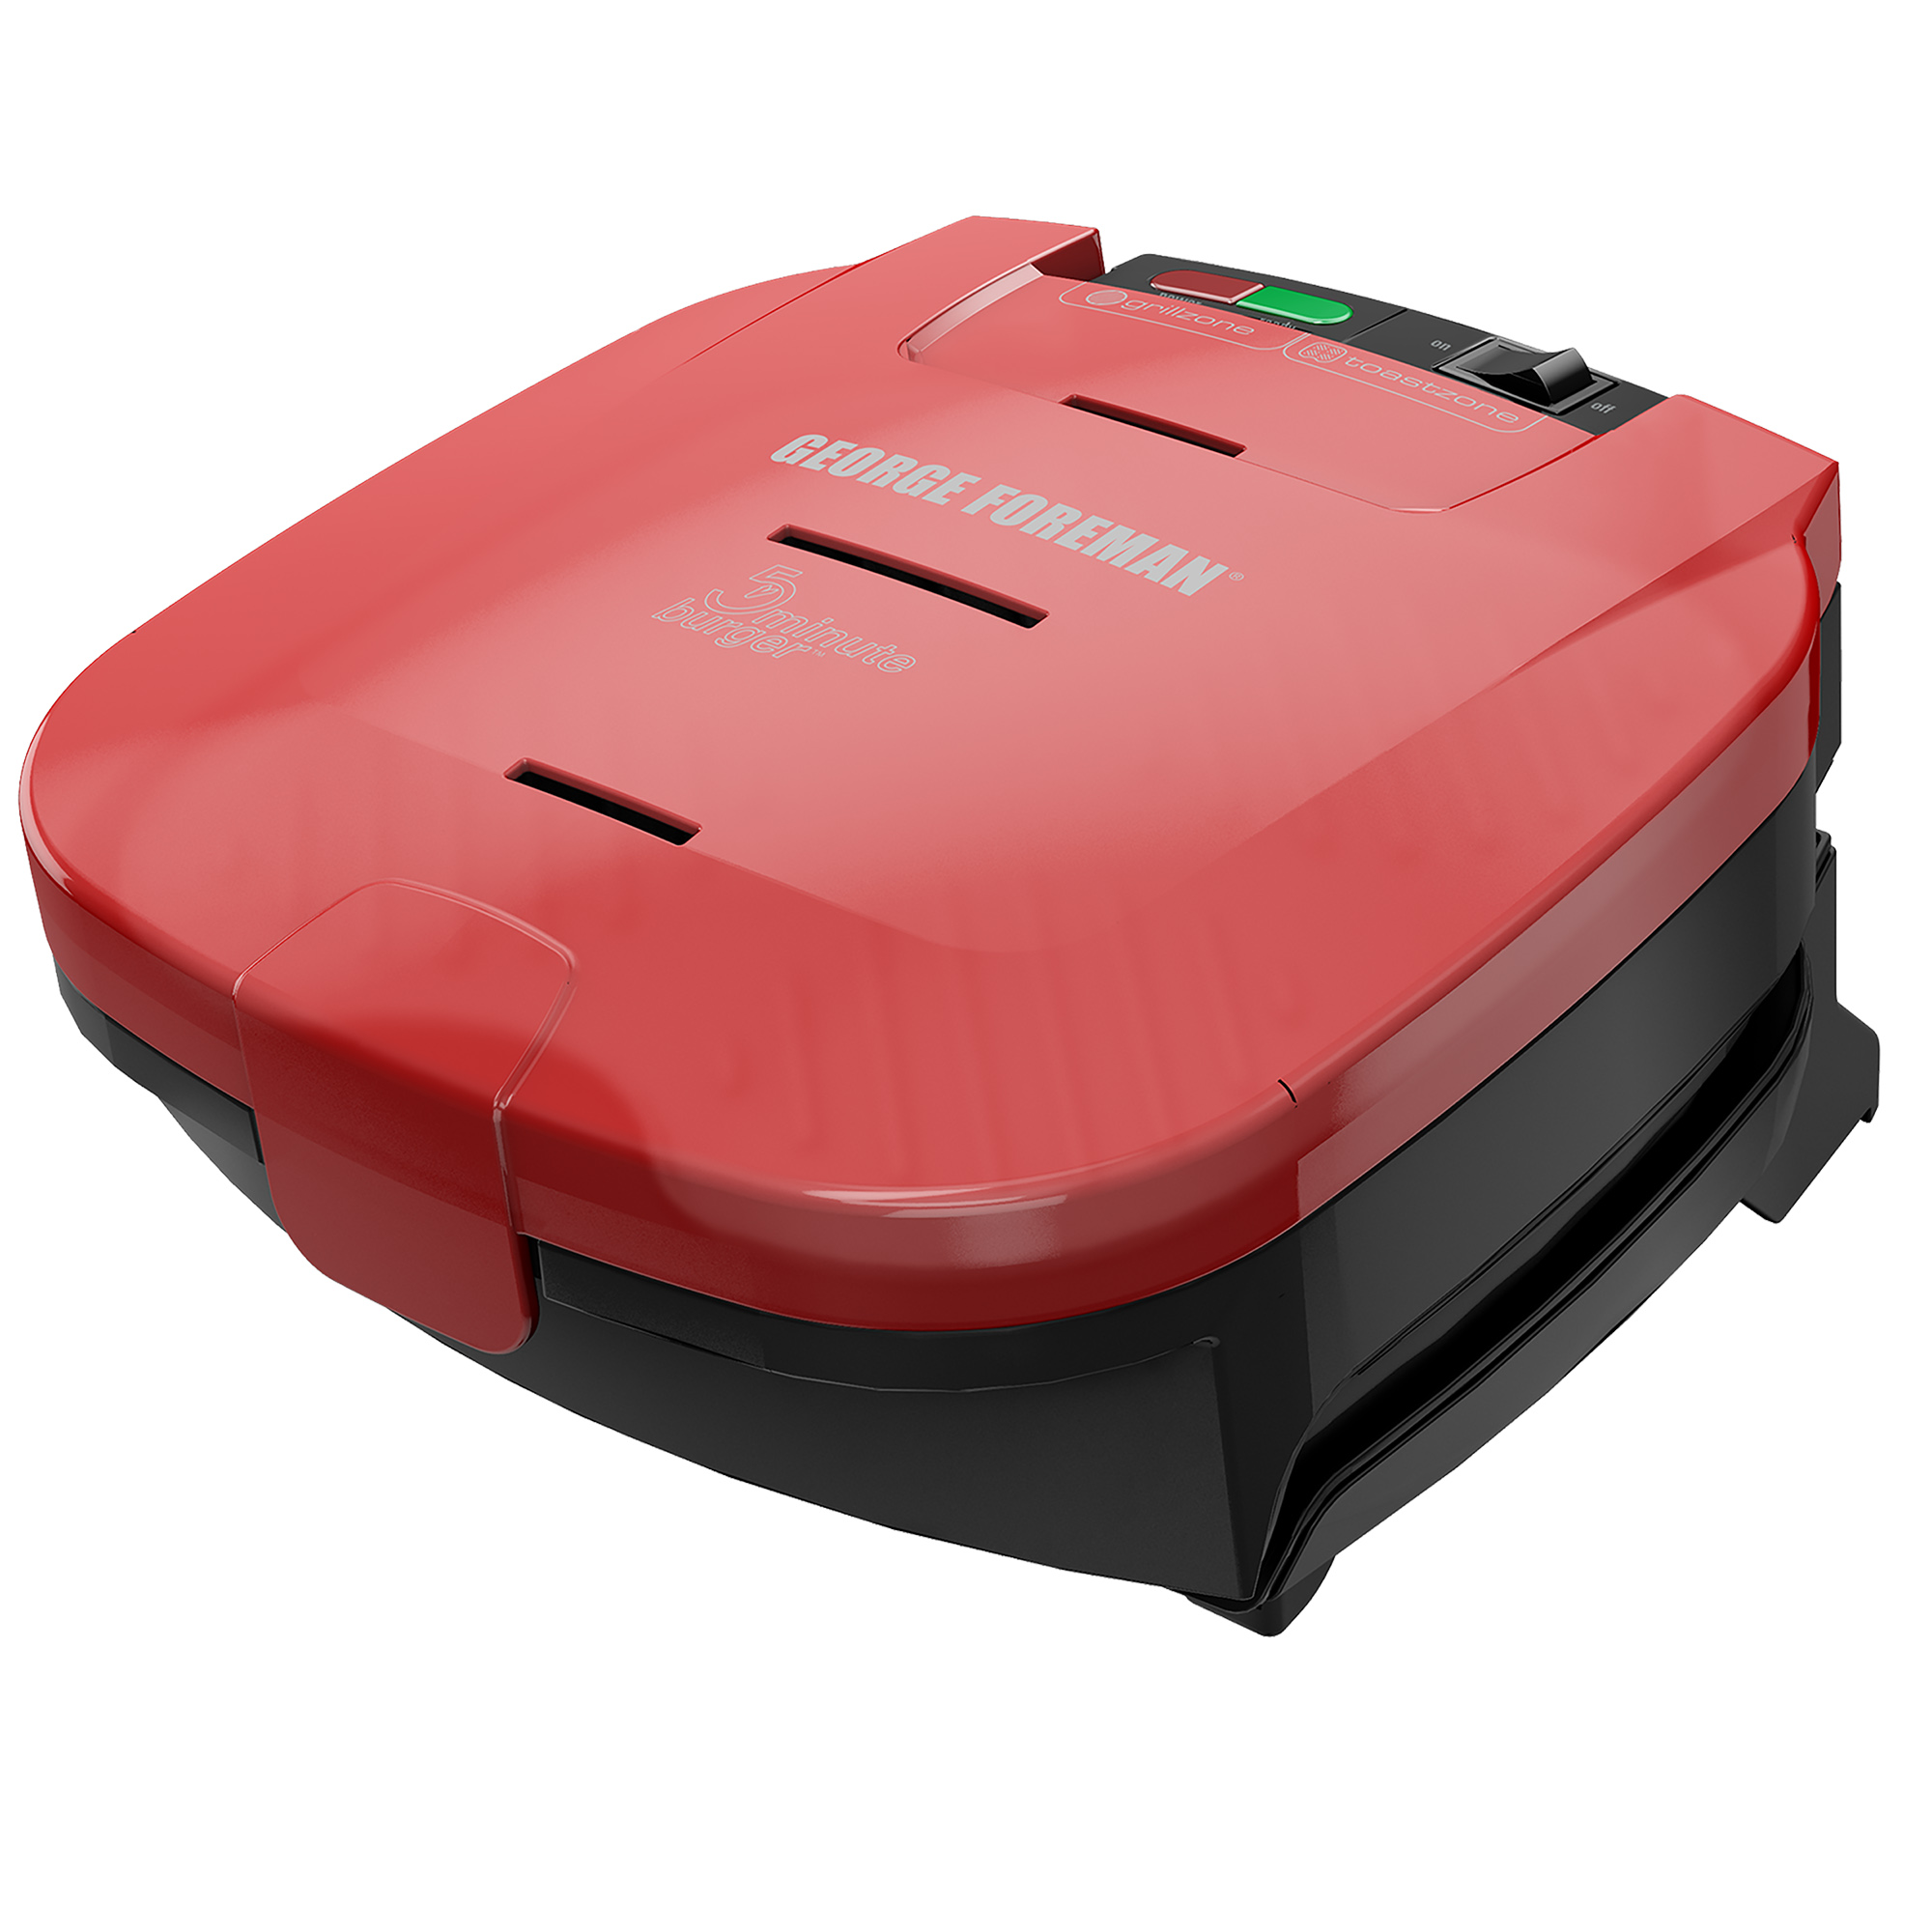 George Foreman 5-Minute Burger Grill, Electric Indoor Grill, Red, GR1036BTR - image 1 of 13